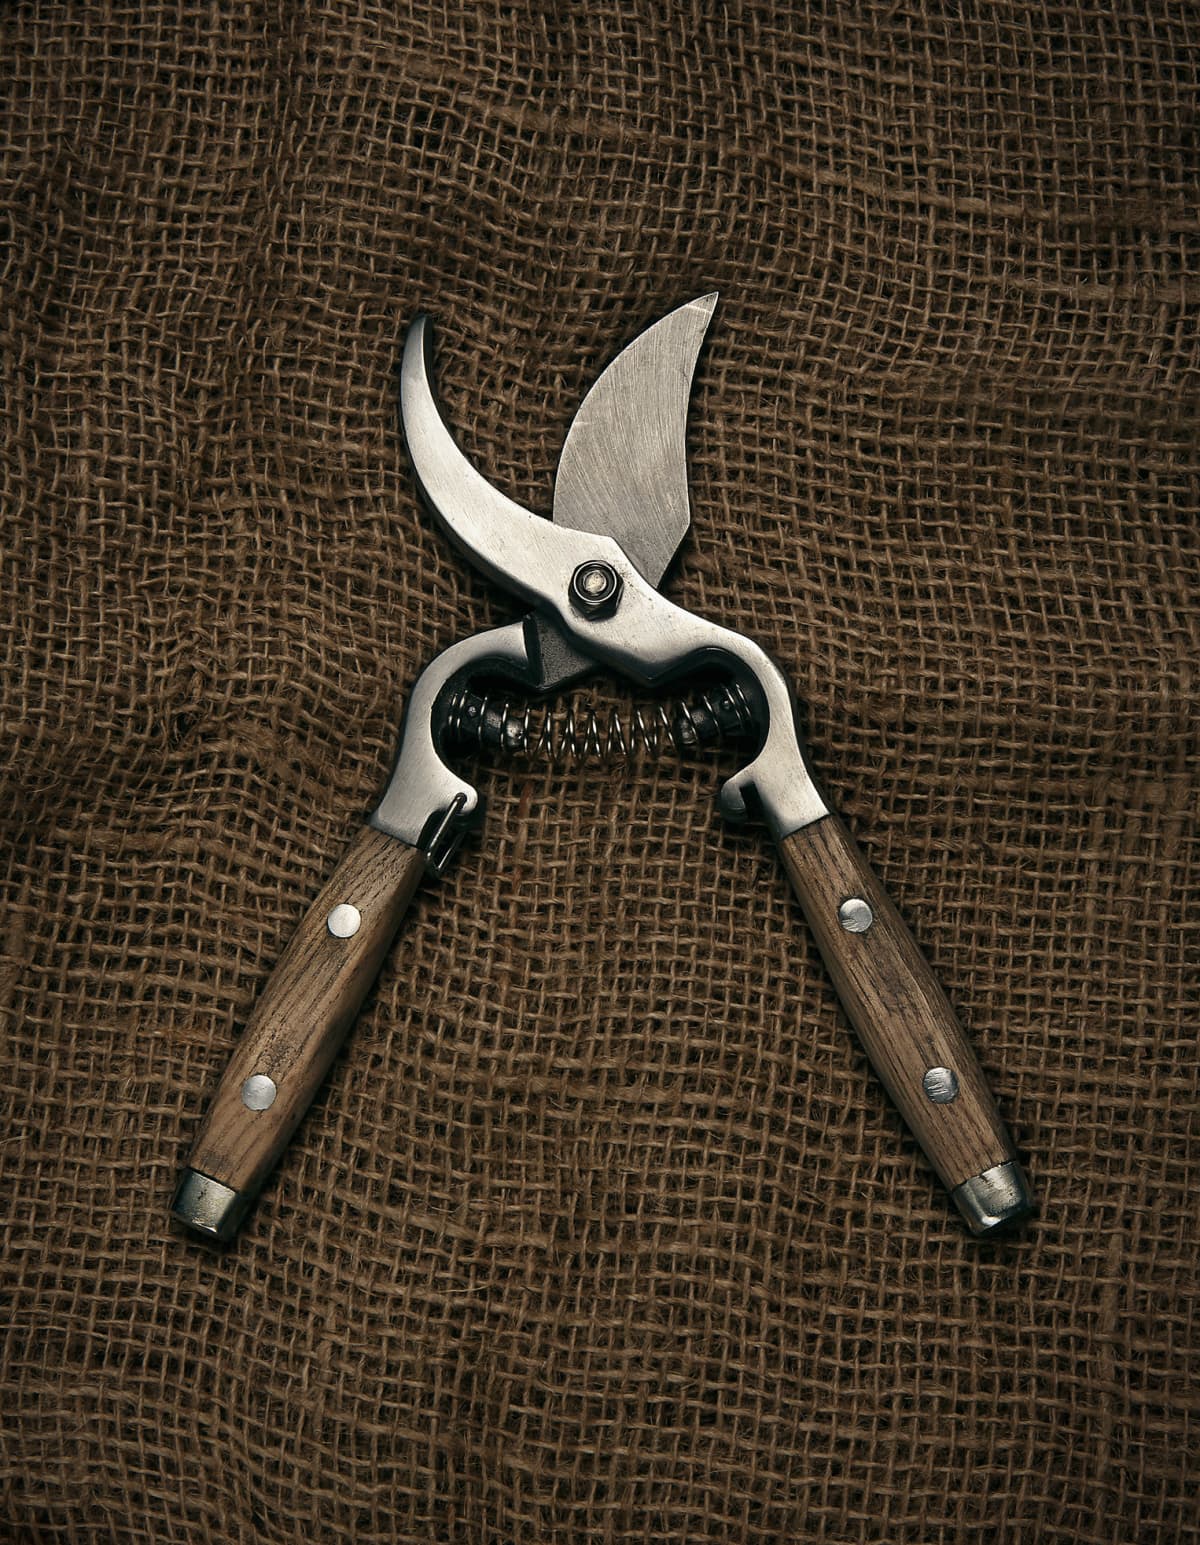 A set of sharp garden shears on a piece of sack background